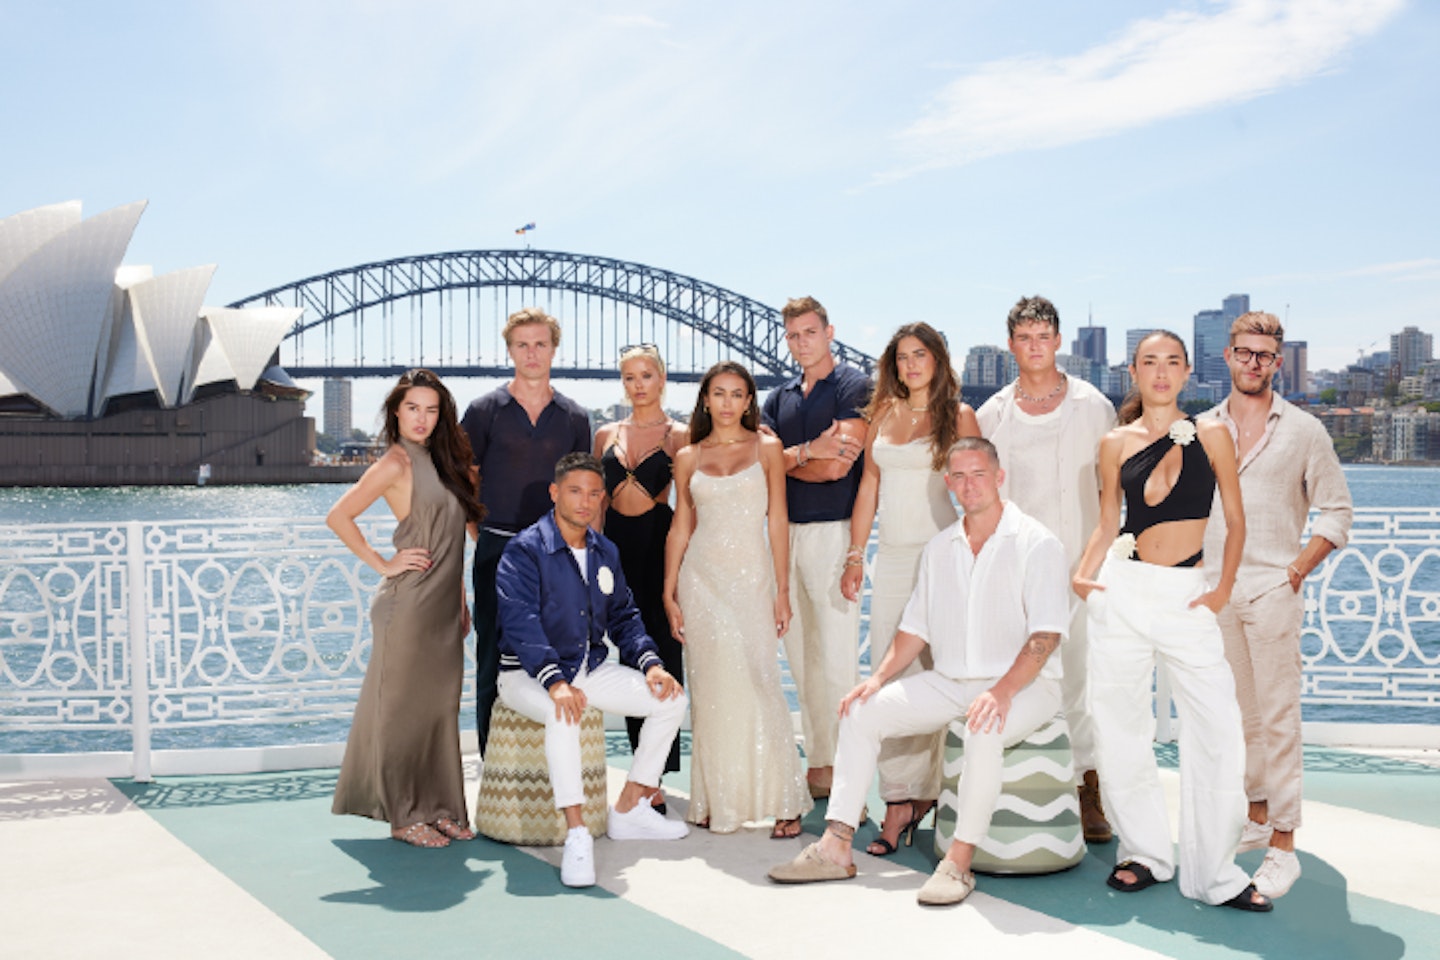 Made in Chelsea Sydney